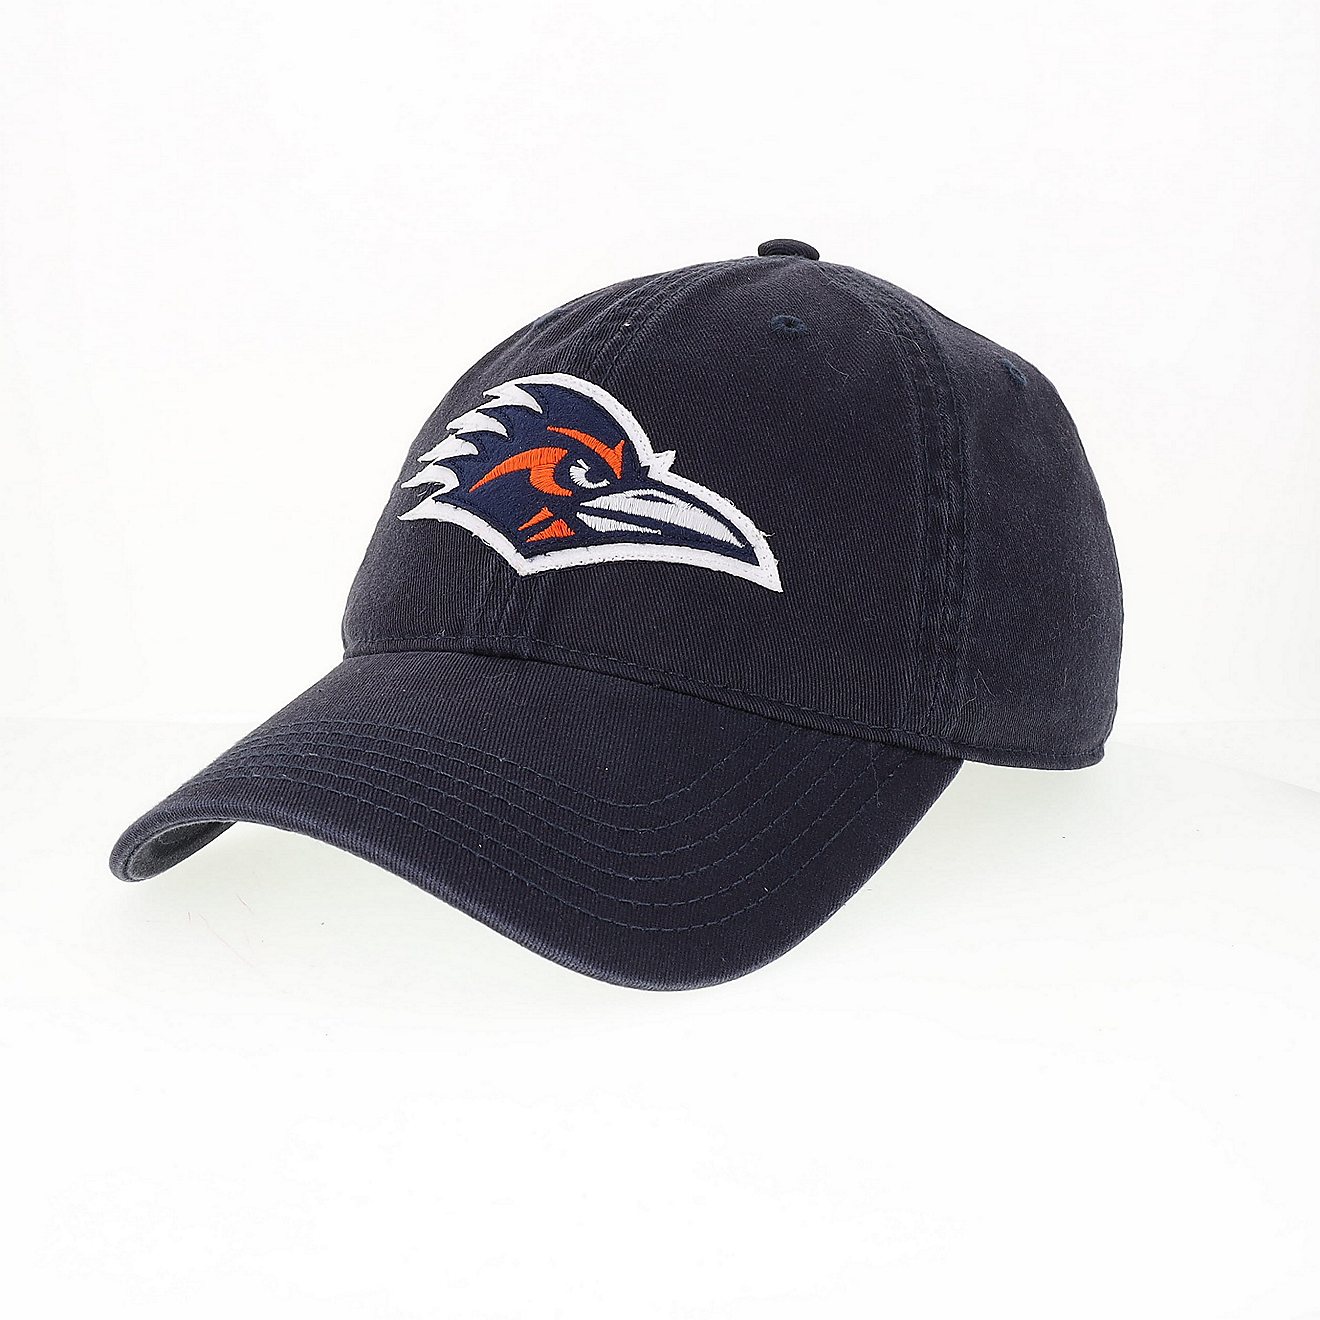 Legacy Sports Men's University of Texas at San Antonio Relaxed Twill Felt Cap                                                    - view number 1